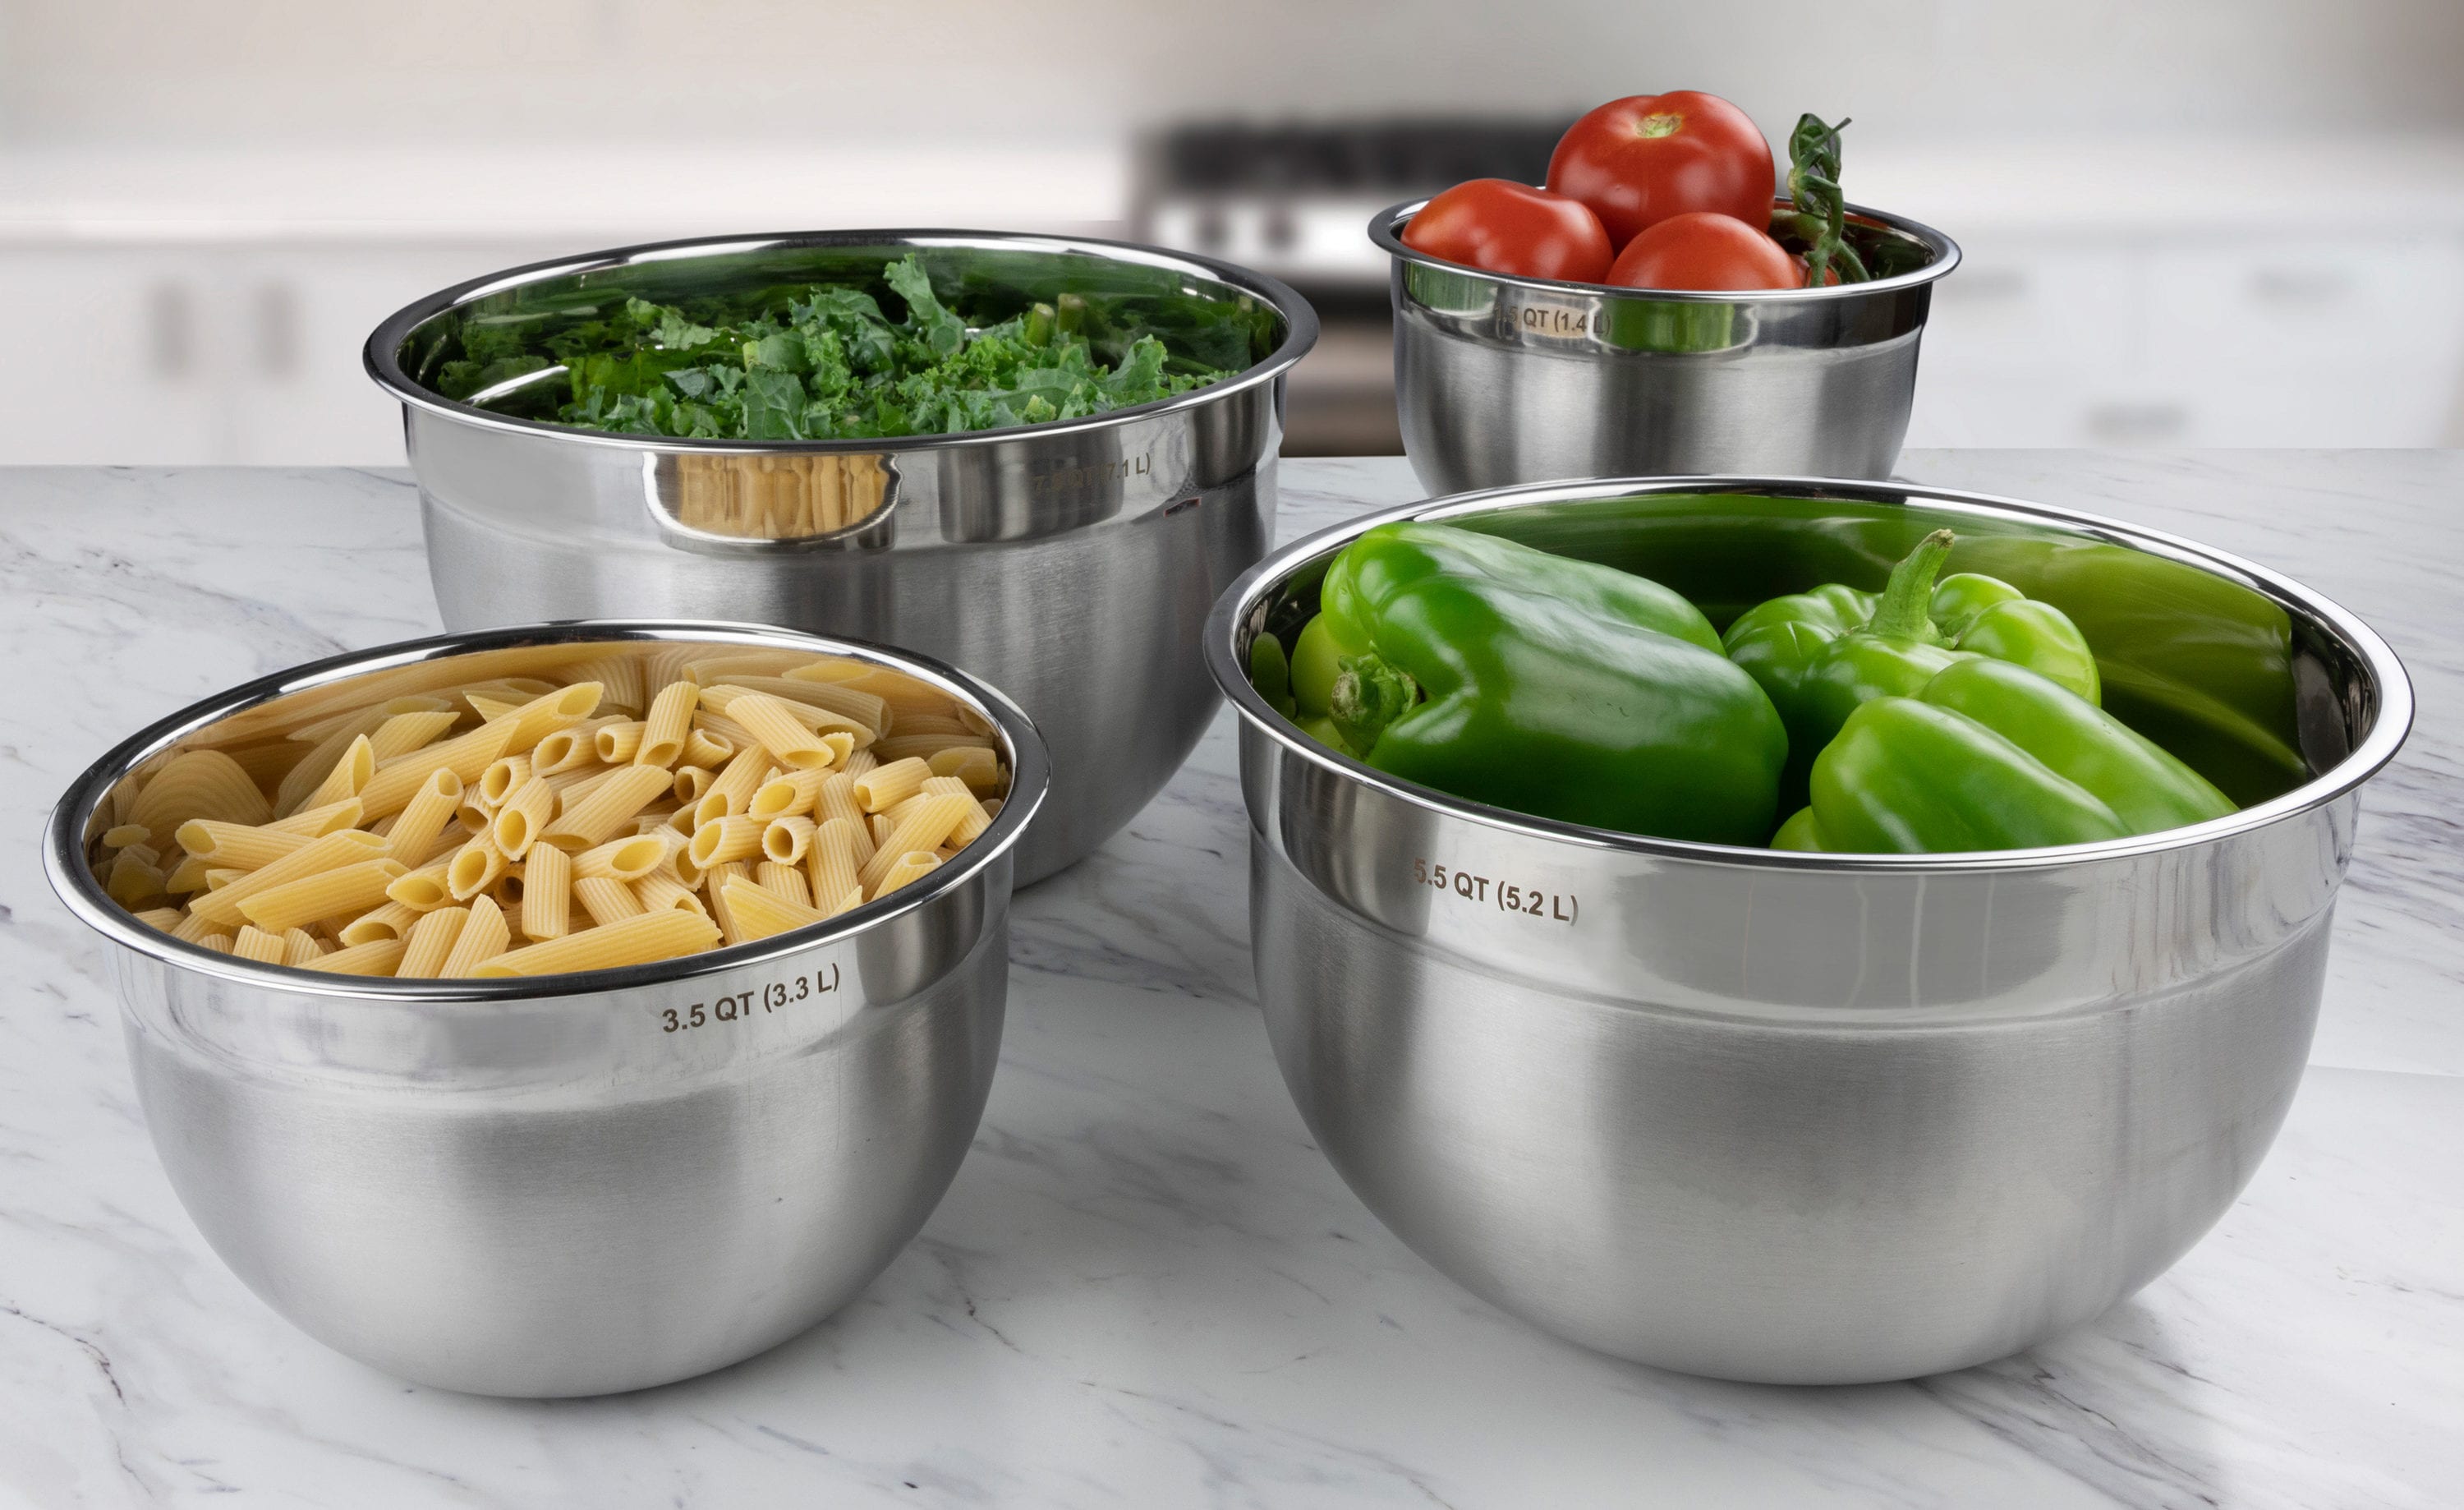 4-Piece Stainless Steel Mixing Bowls Set